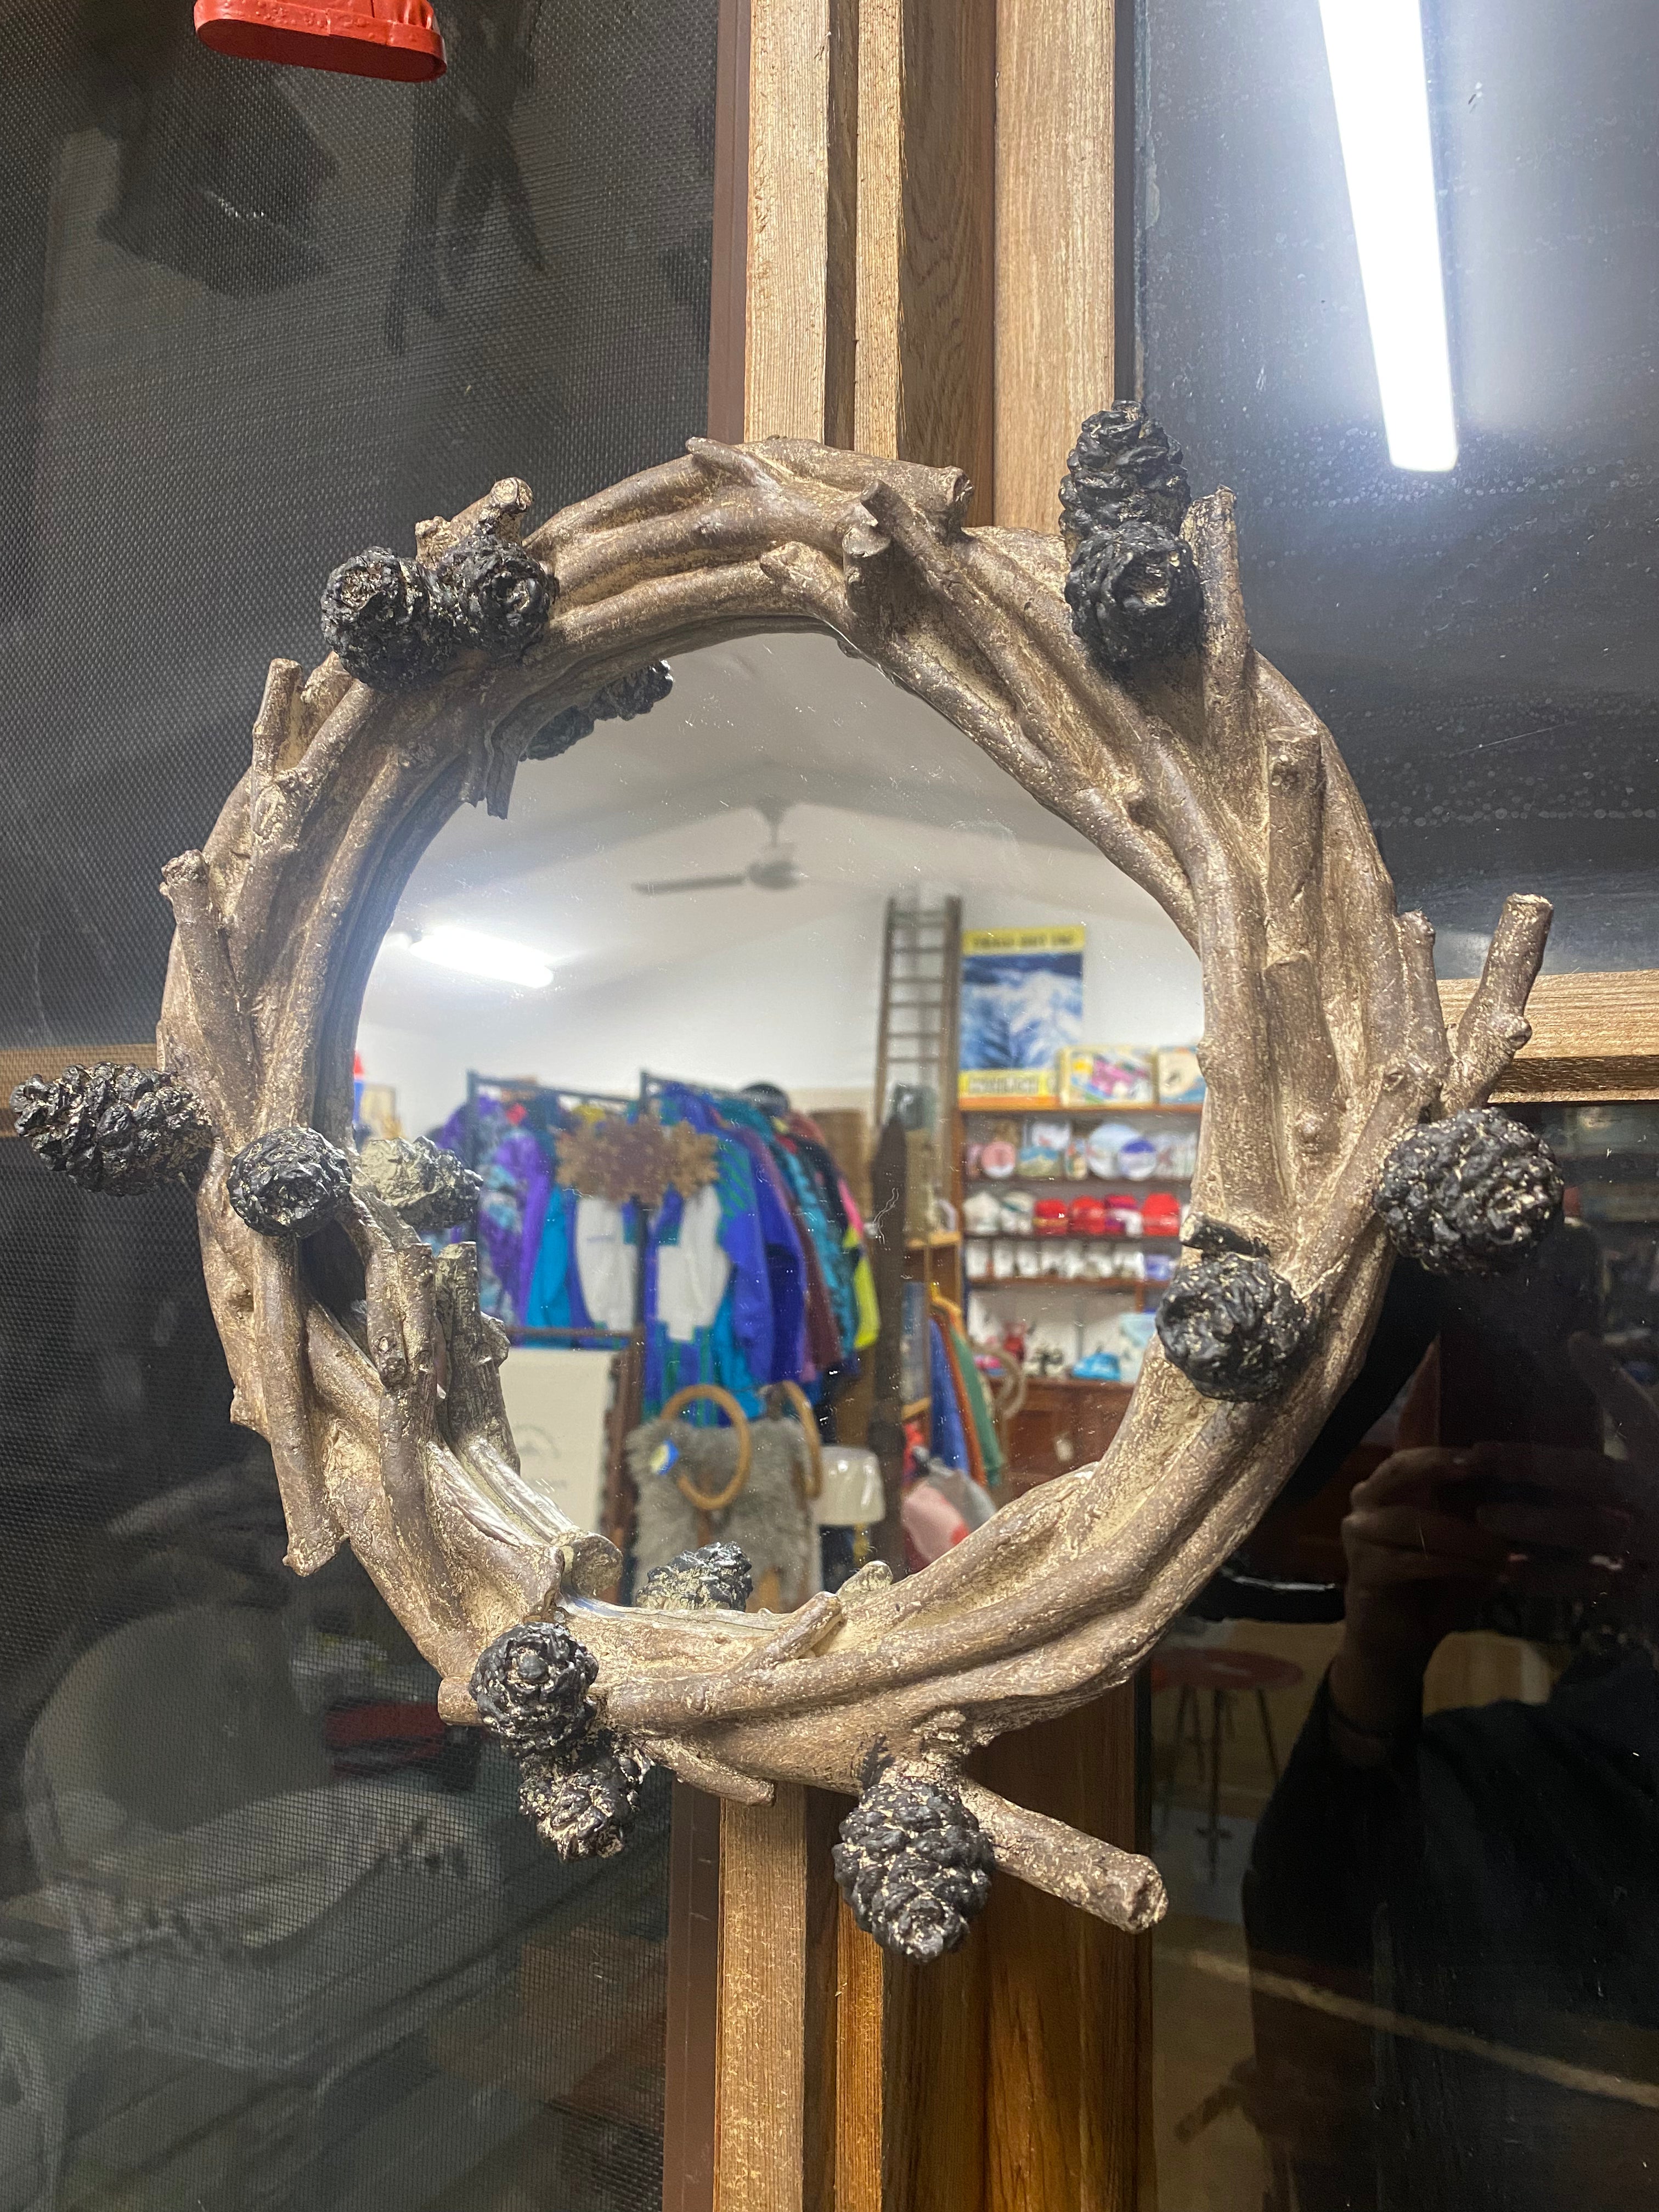 Pinecone mirror: Mirror framed by resin branches and pinecones, hanging on a window frame reflecting the I Dream of Snow Store